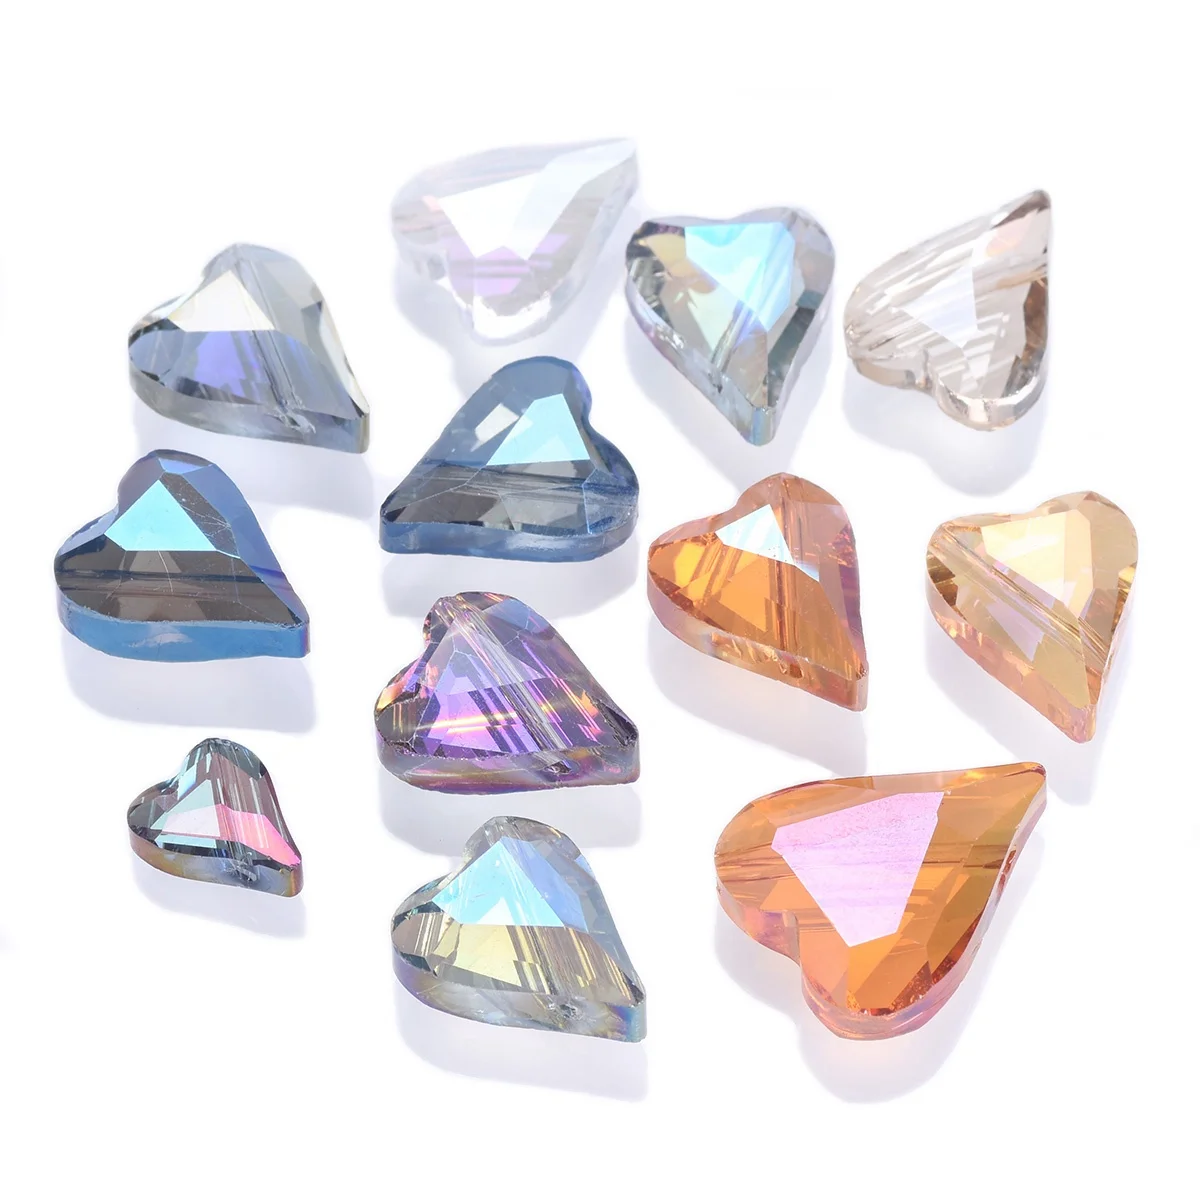 10pcs Pointed Heart Faceted Crystal Glass Asymmetric Hole 12x10mm 18x14mm 22x18mm Loose Beads for Jewelry Making DIY Crafts